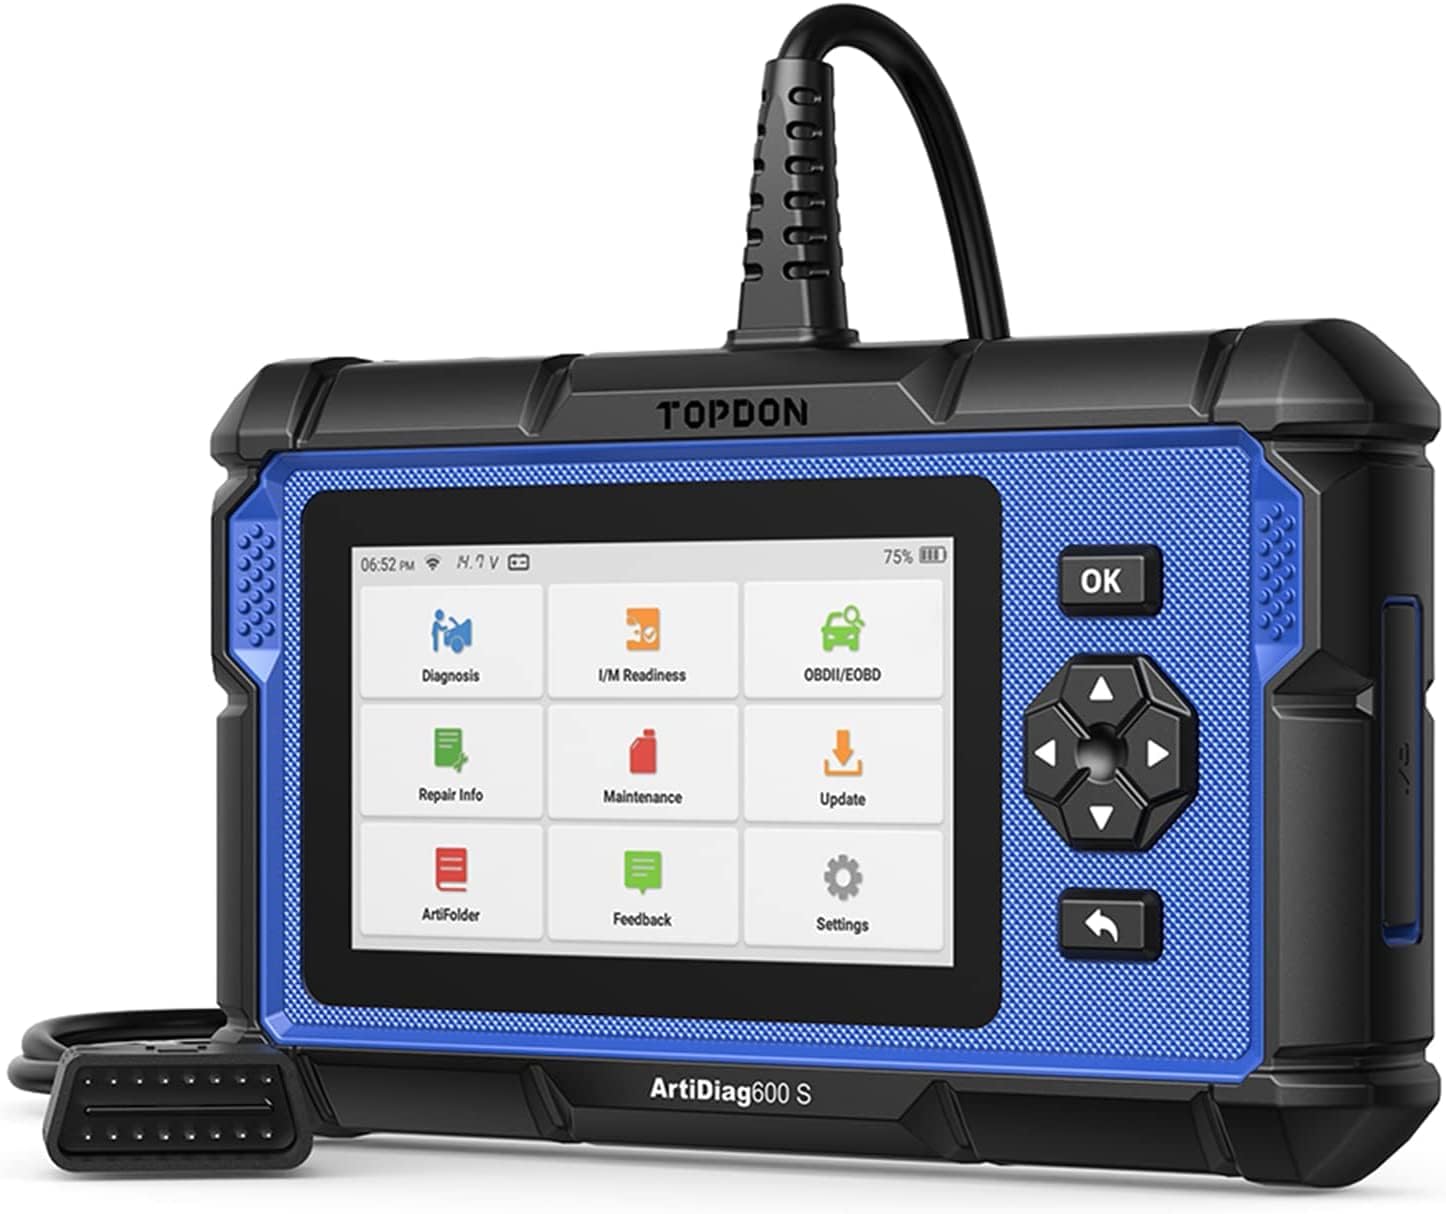 TOPDON ArtiDiag600S OBD2 Code Reader, Car Diagnostic Tool For 4 Systems Engine/ABS/Airbag/AT-2606